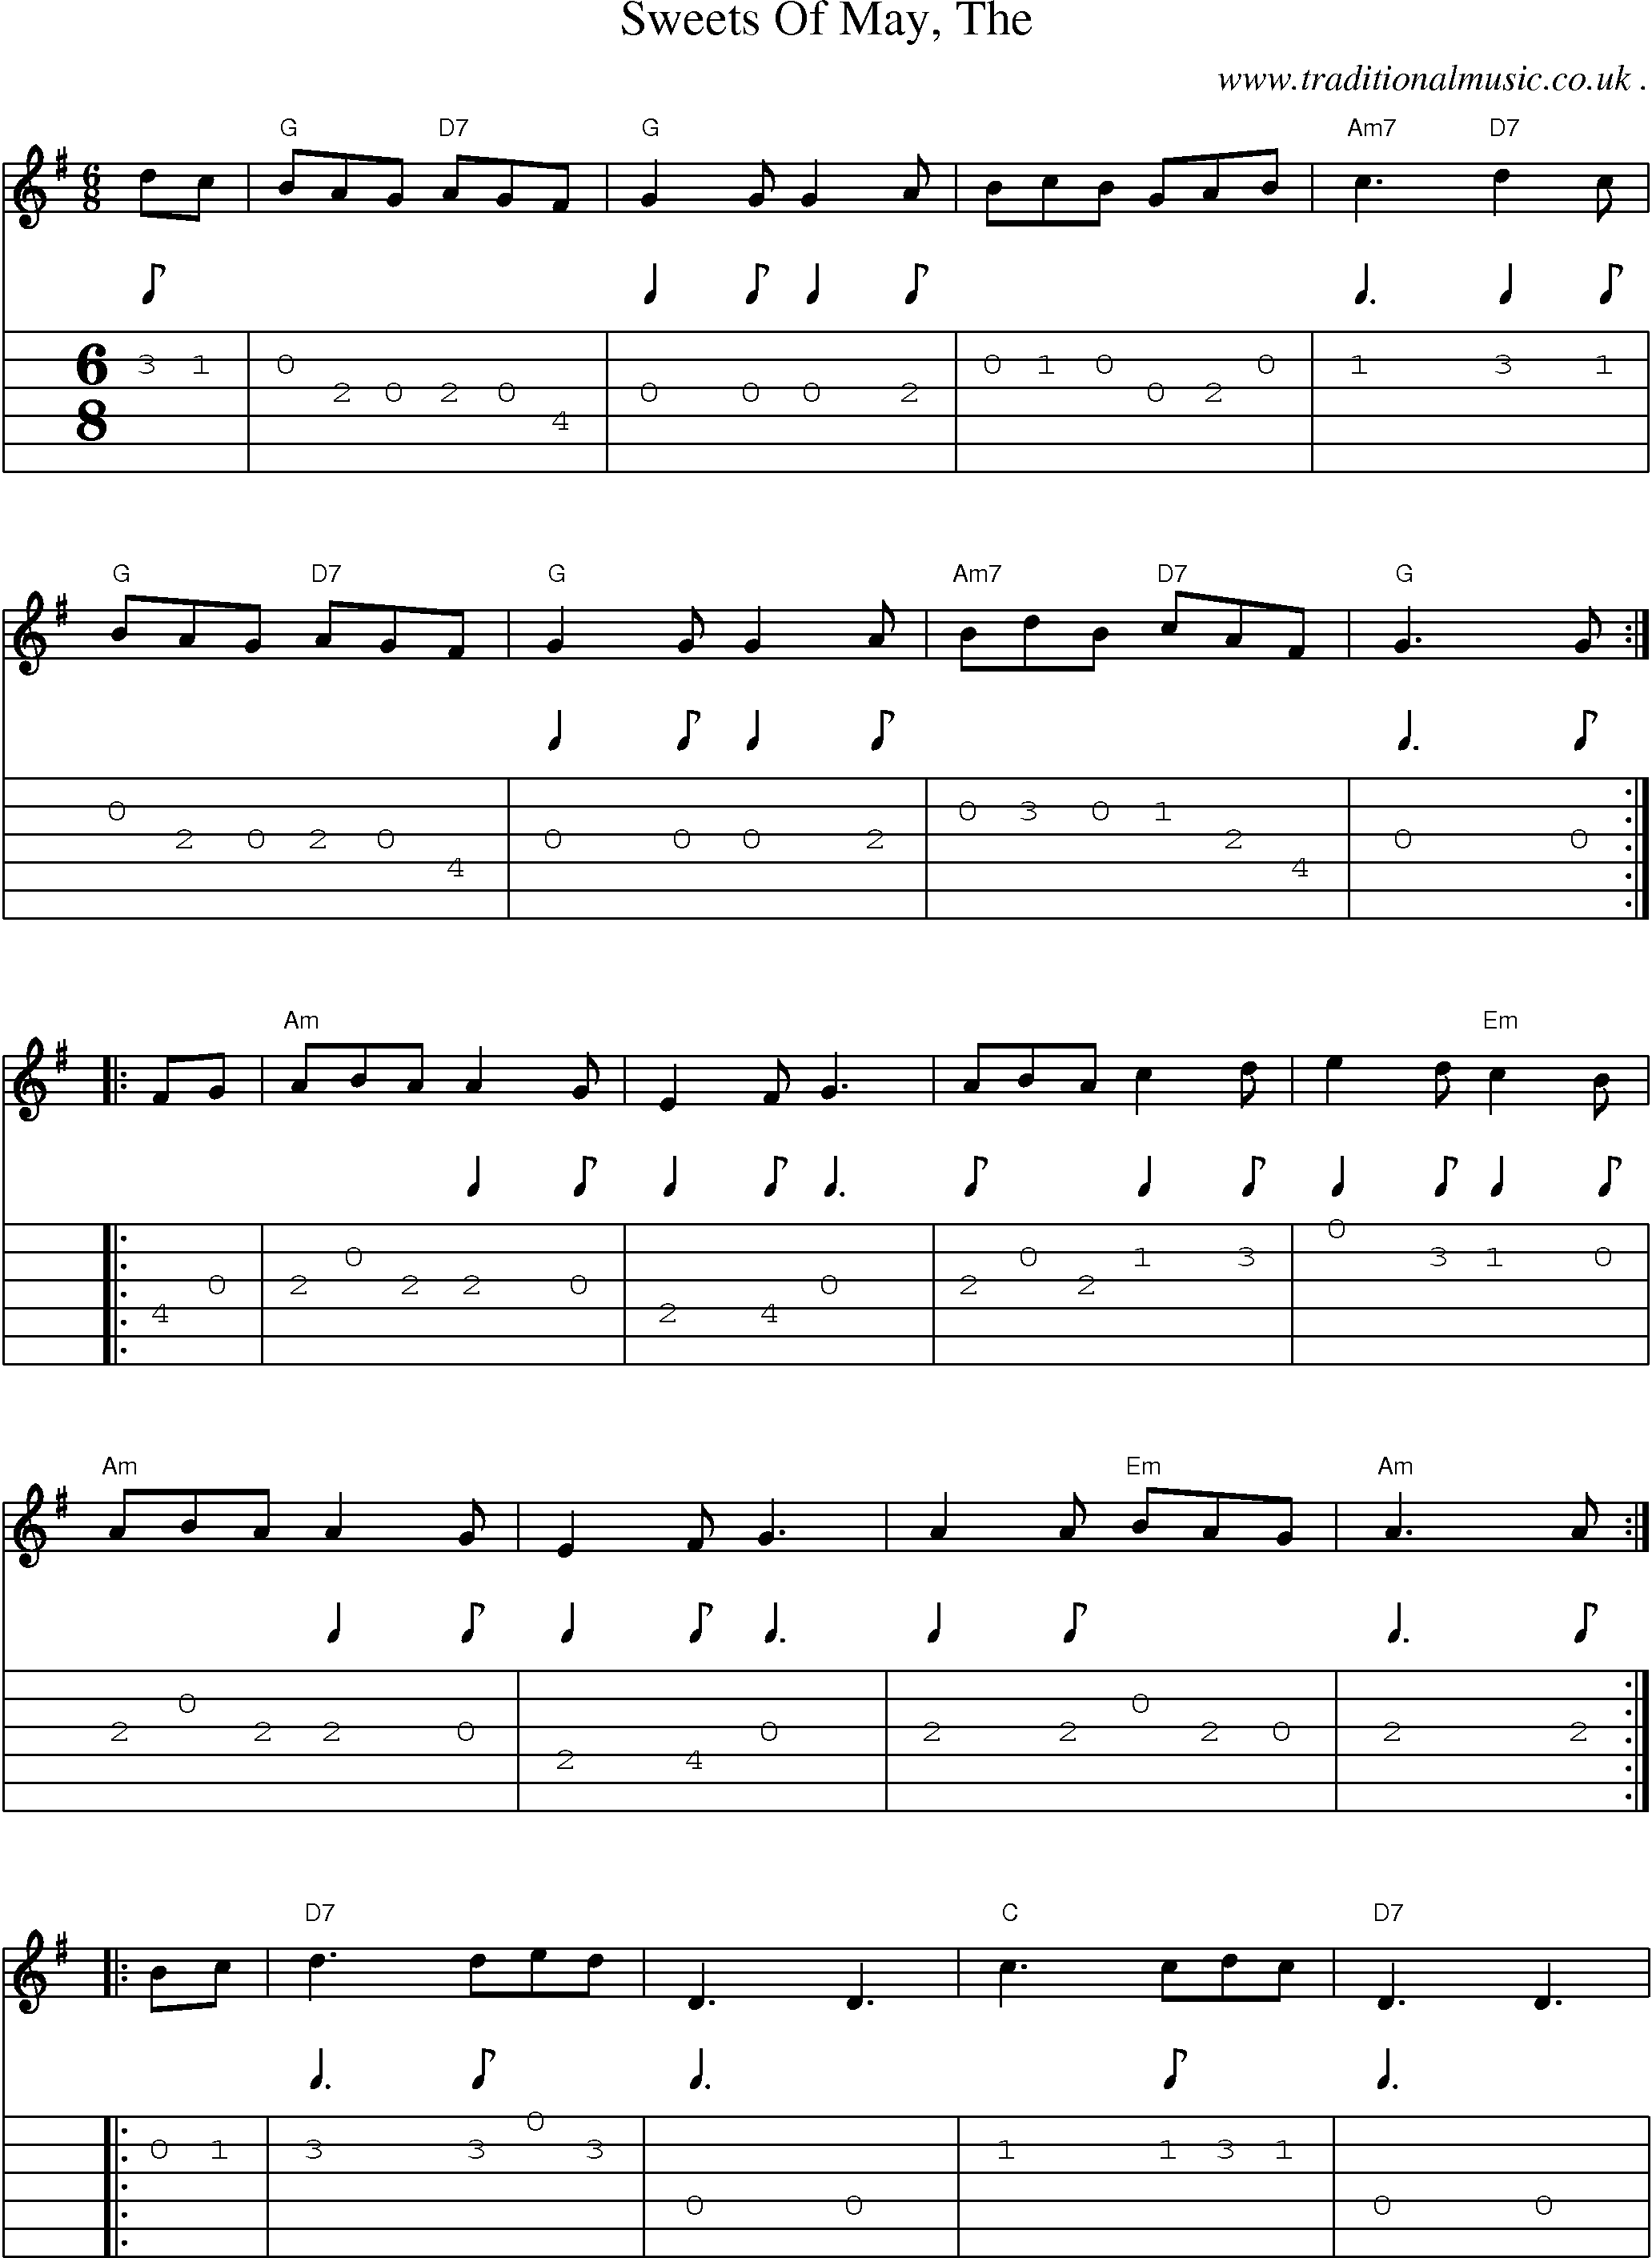 Music Score and Guitar Tabs for Sweets Of May The